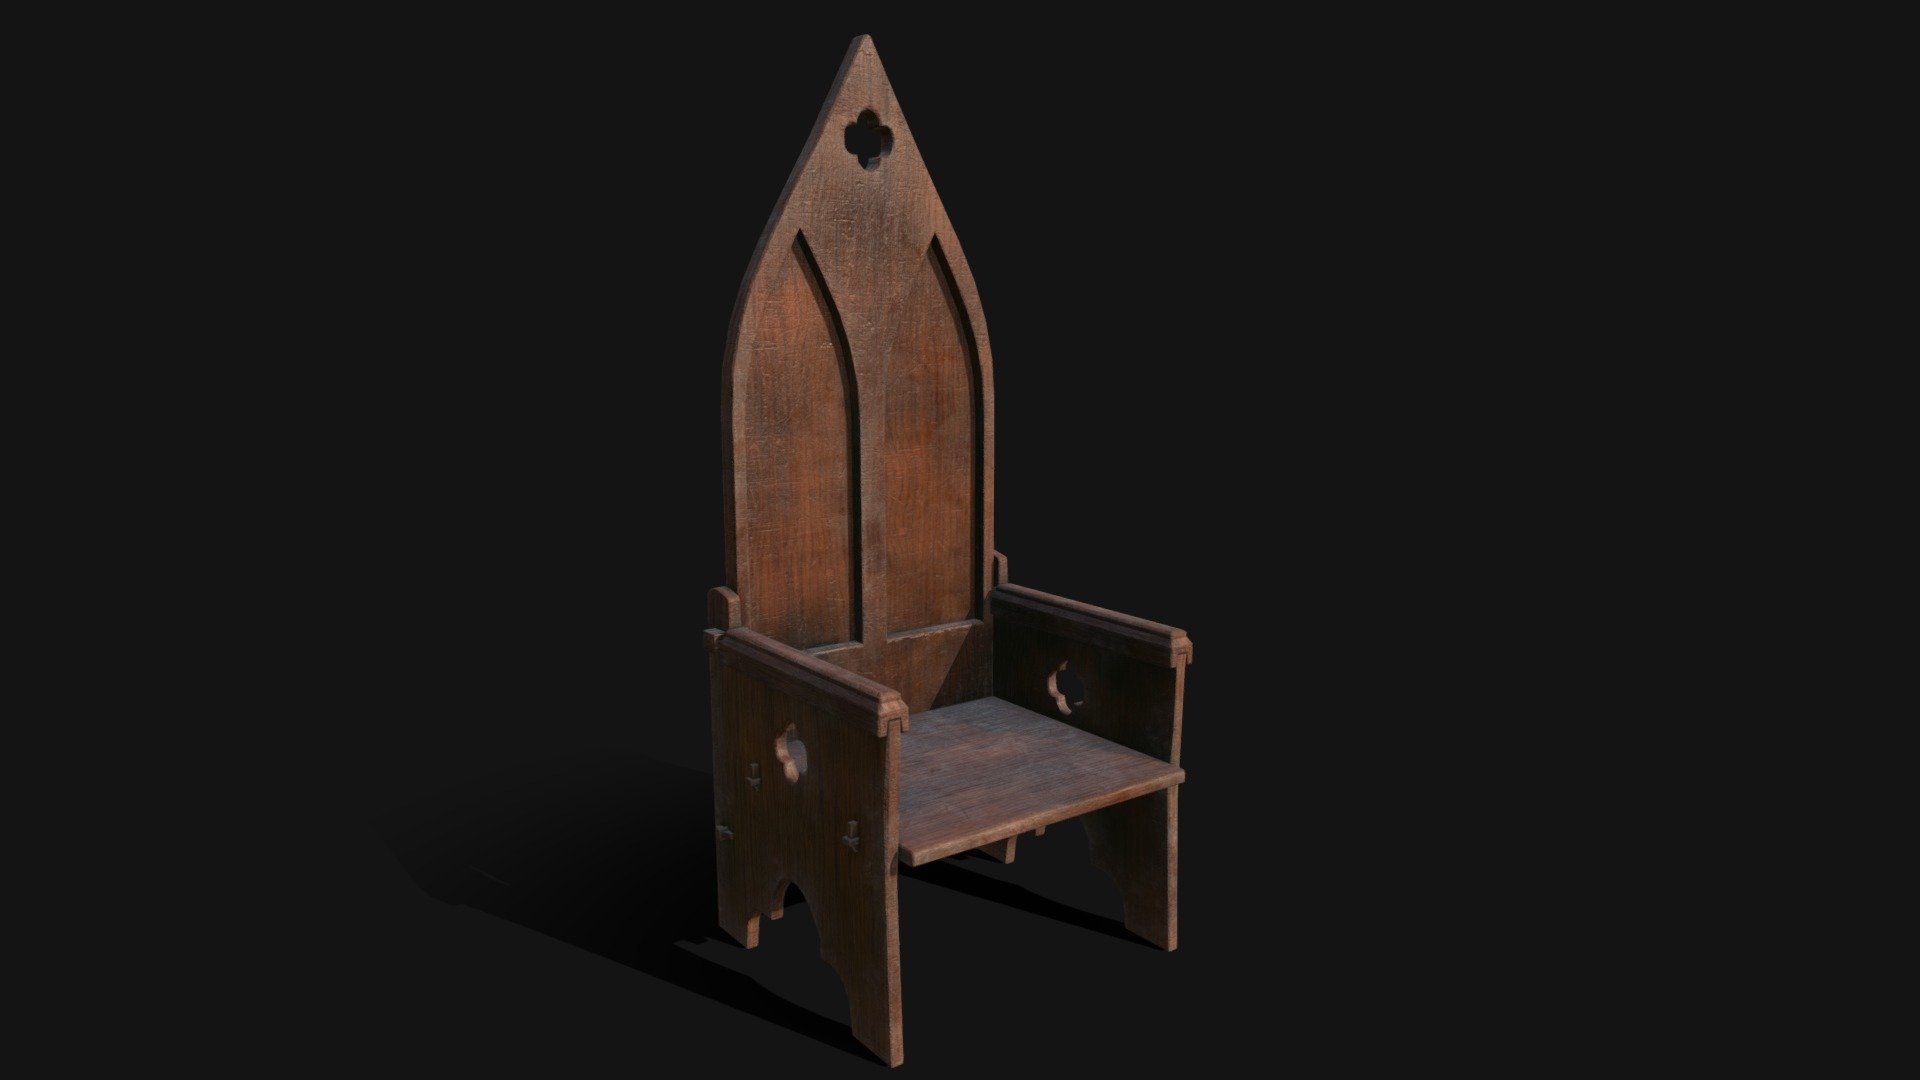 Gothic  Medieval Chair 3D Model. This model contains the Gothic  Medieval Chair itself 

All modeled in Maya, textured with Substance Painter.

The model was built to scale and is UV unwrapped properly

⦁   4220 tris. 

⦁   Contains: .FBX .OBJ and .DAE

⦁   Model has clean topology. No Ngons.

⦁   Built to scale

⦁   Unwrapped UV Map

⦁   4K Texture set

⦁   High quality details

⦁   Based on real life references

⦁   Renders done in Marmoset Toolbag

Polycount: 

Verts 2208

Edges 4546

Faces 2356

Tris 4220

If you have any questions please feel free to ask me 3d model